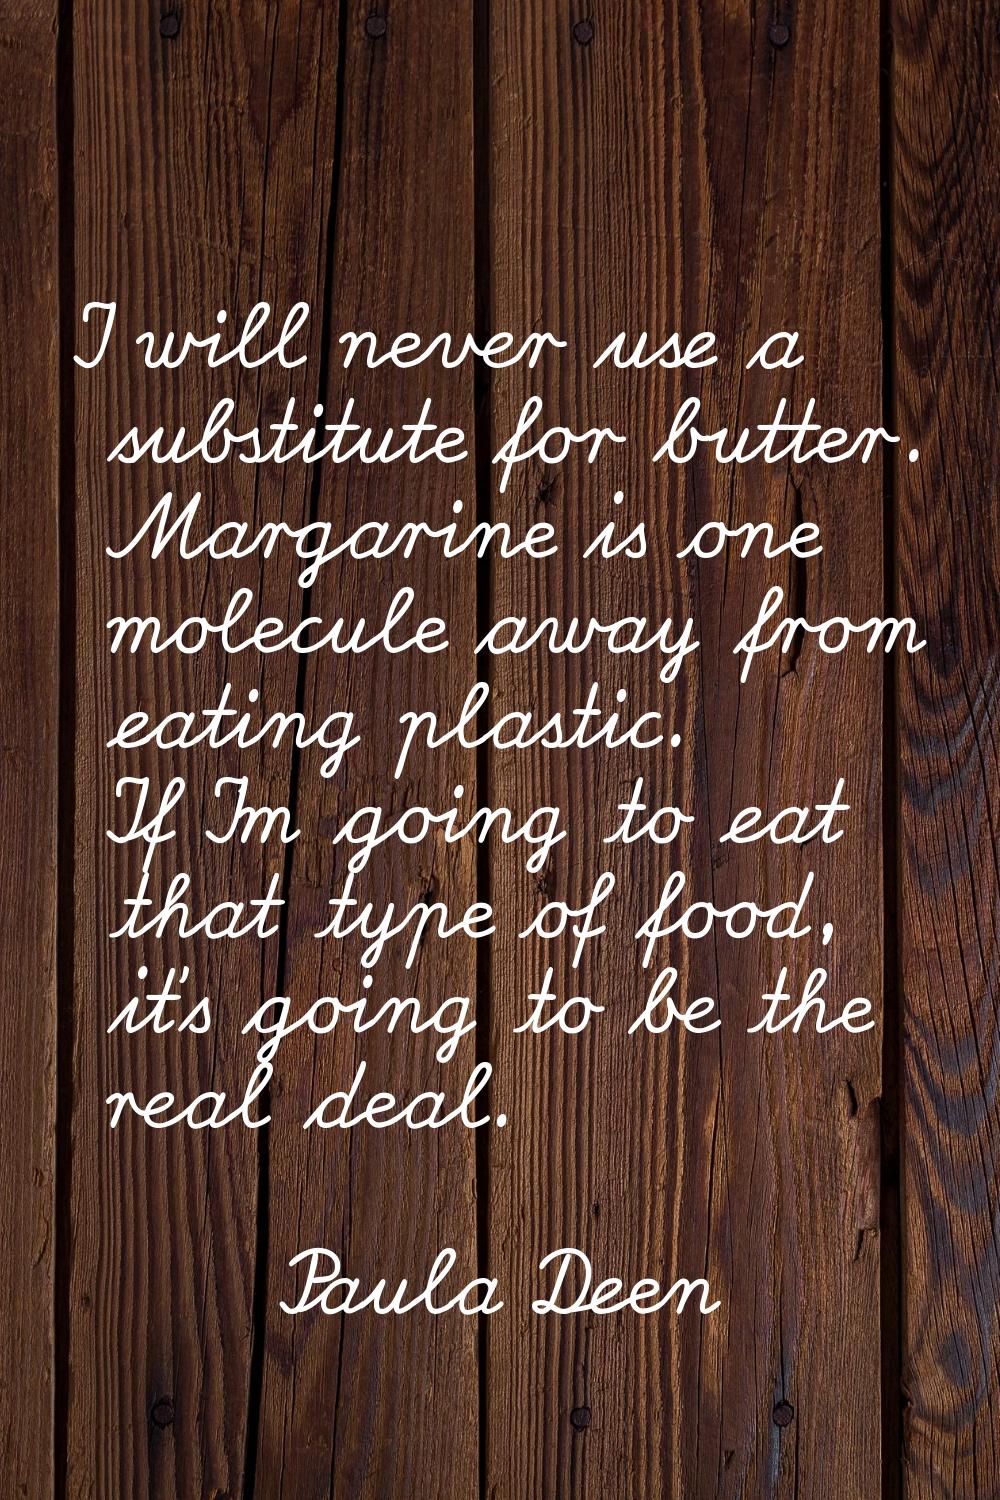 I will never use a substitute for butter. Margarine is one molecule away from eating plastic. If I'